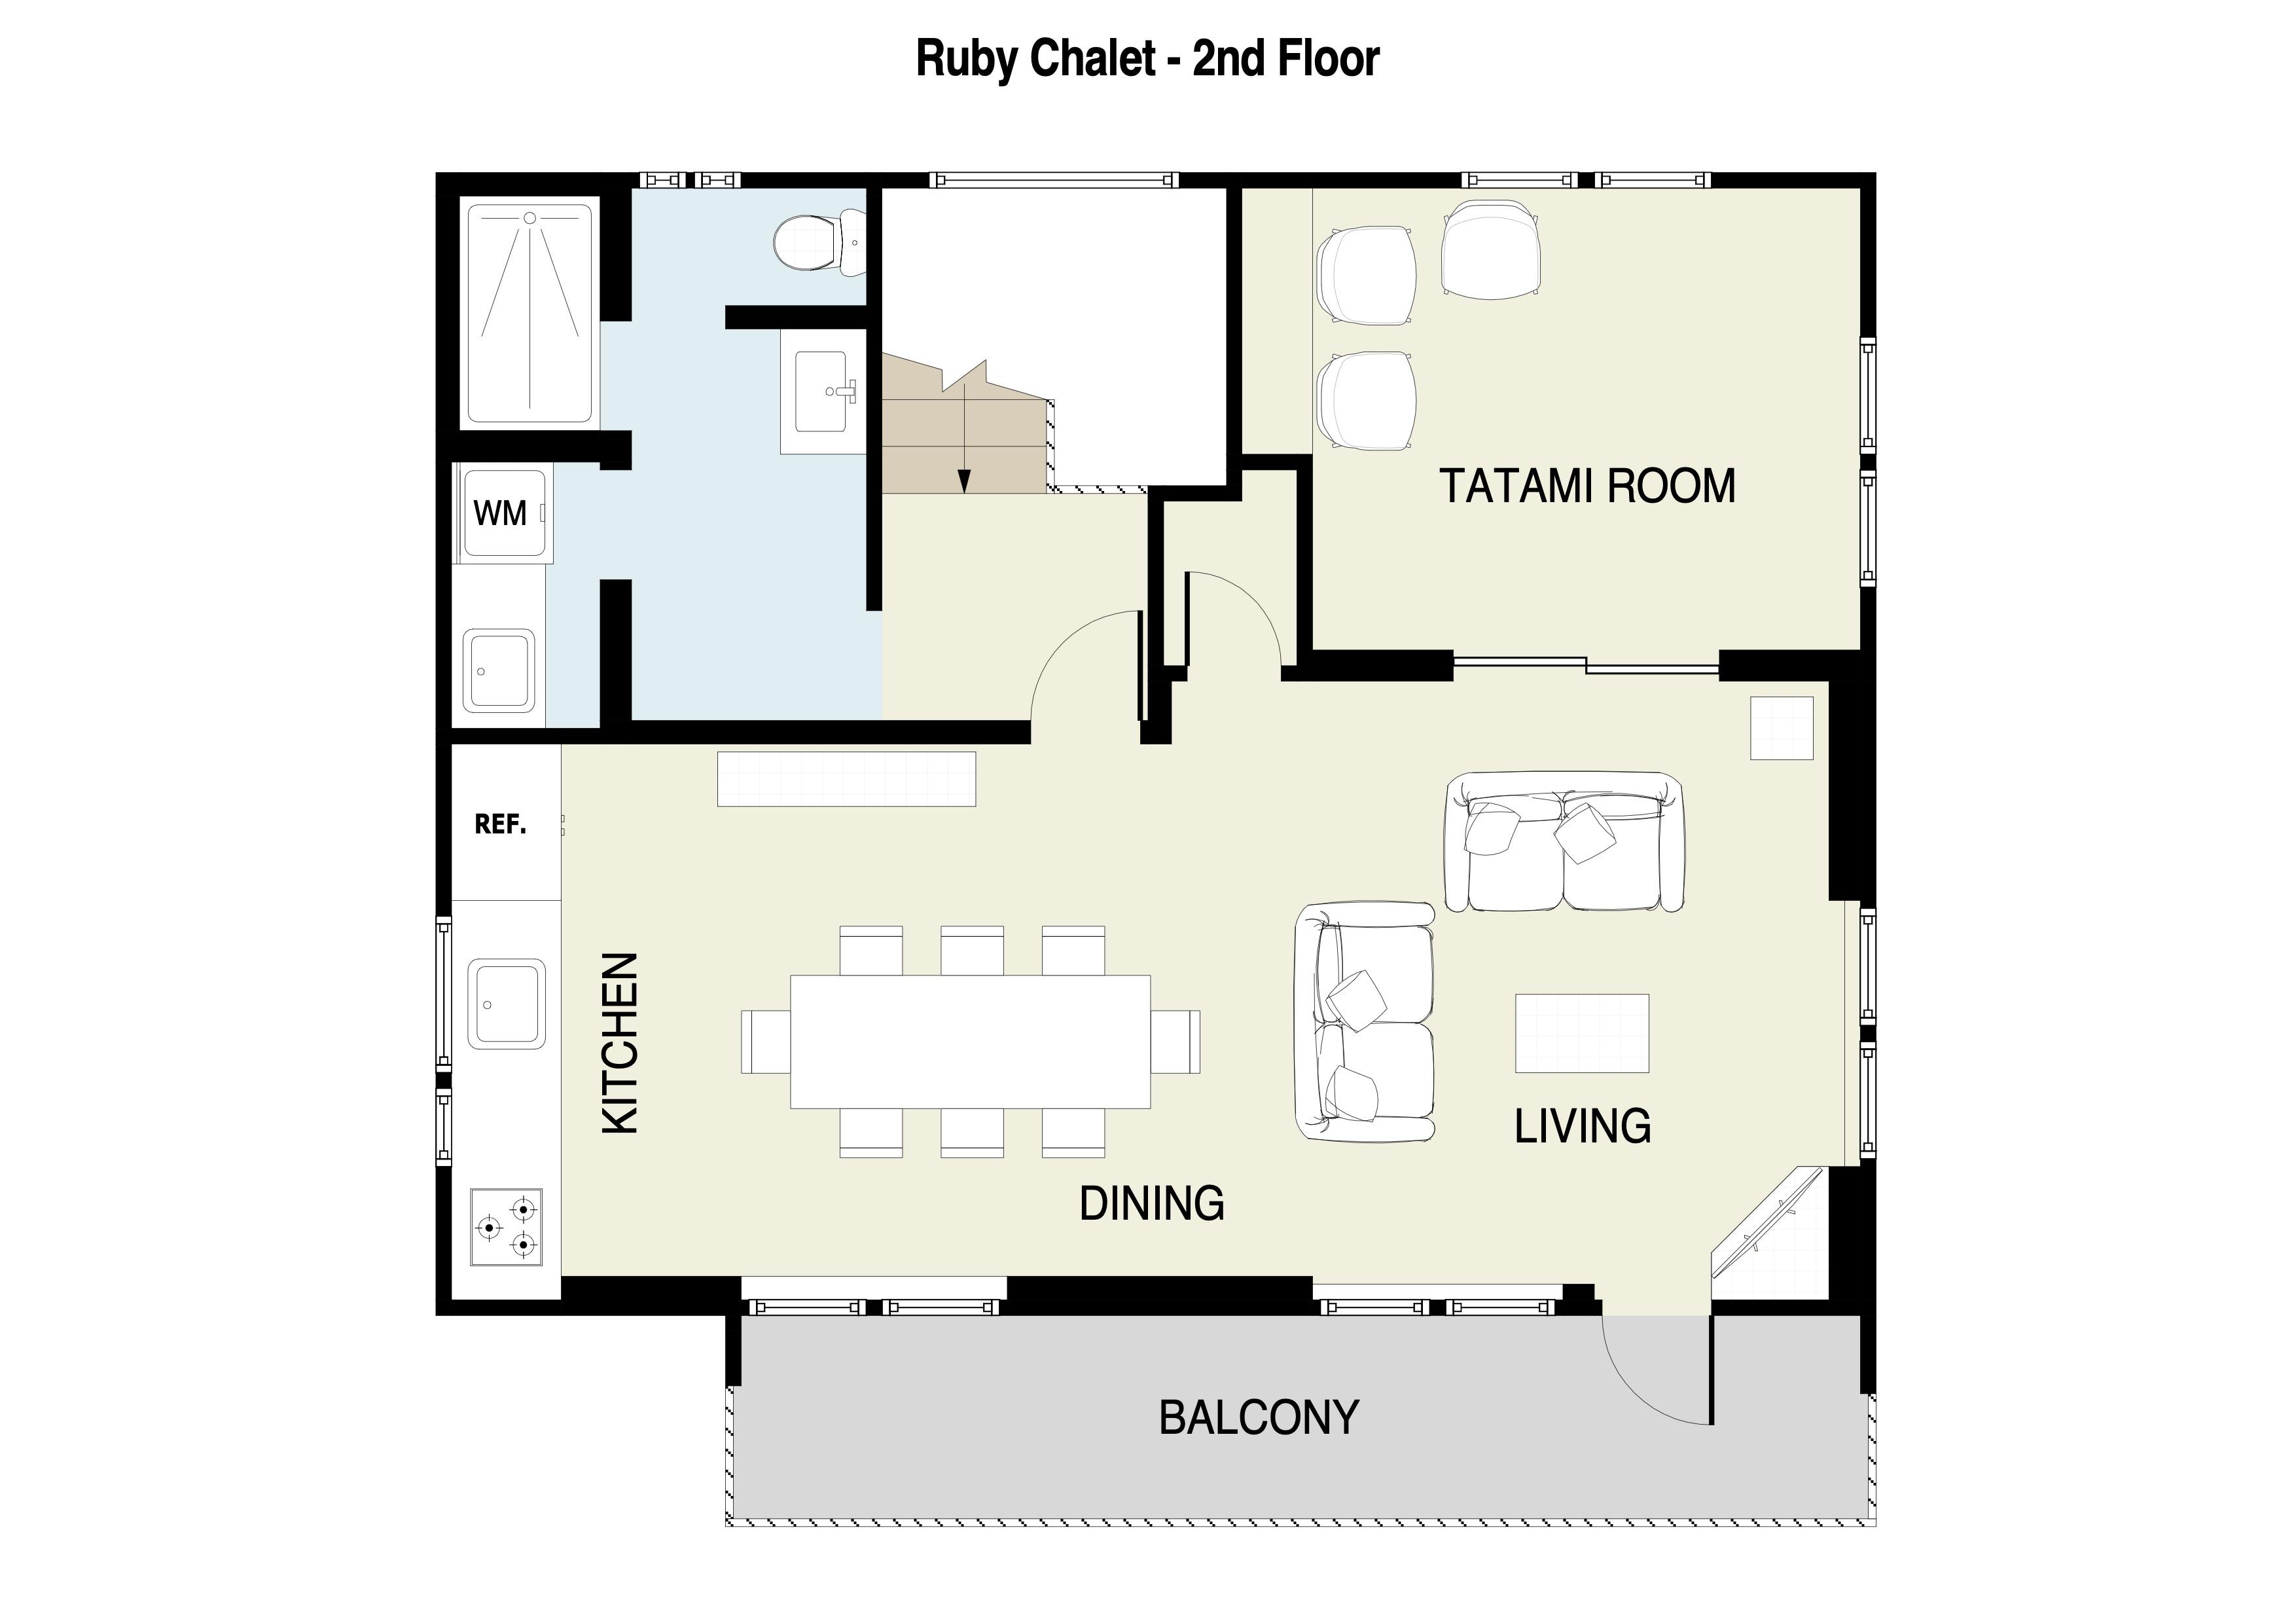 Ruby Chalet 2nd floor plans